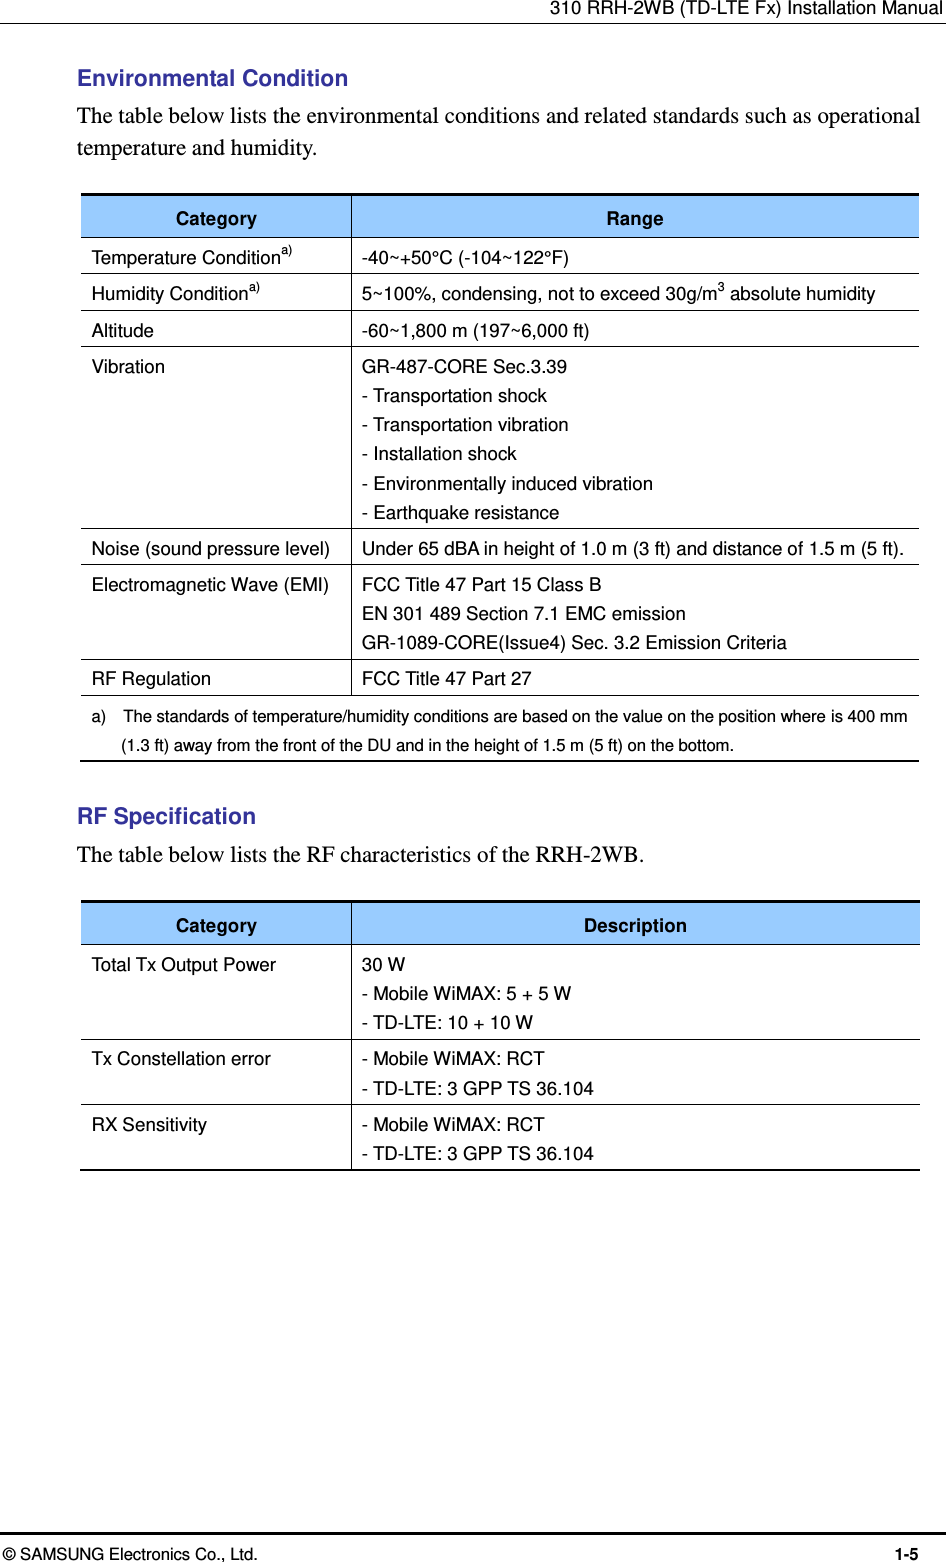 310 RRH-2WB (TD-LTE Fx) Installation Manual  © SAMSUNG Electronics Co., Ltd.  1-5 Environmental Condition The table below lists the environmental conditions and related standards such as operational temperature and humidity.  Category Range Temperature Conditiona) -40~+50°C (-104~122°F) Humidity Conditiona) 5~100%, condensing, not to exceed 30g/m3 absolute humidity Altitude -60~1,800 m (197~6,000 ft) Vibration GR-487-CORE Sec.3.39 - Transportation shock - Transportation vibration - Installation shock - Environmentally induced vibration - Earthquake resistance Noise (sound pressure level) Under 65 dBA in height of 1.0 m (3 ft) and distance of 1.5 m (5 ft). Electromagnetic Wave (EMI) FCC Title 47 Part 15 Class B EN 301 489 Section 7.1 EMC emission GR-1089-CORE(Issue4) Sec. 3.2 Emission Criteria RF Regulation FCC Title 47 Part 27 a)    The standards of temperature/humidity conditions are based on the value on the position where is 400 mm (1.3 ft) away from the front of the DU and in the height of 1.5 m (5 ft) on the bottom.  RF Specification The table below lists the RF characteristics of the RRH-2WB.  Category Description Total Tx Output Power   30 W - Mobile WiMAX: 5 + 5 W   - TD-LTE: 10 + 10 W Tx Constellation error - Mobile WiMAX: RCT - TD-LTE: 3 GPP TS 36.104 RX Sensitivity - Mobile WiMAX: RCT - TD-LTE: 3 GPP TS 36.104  